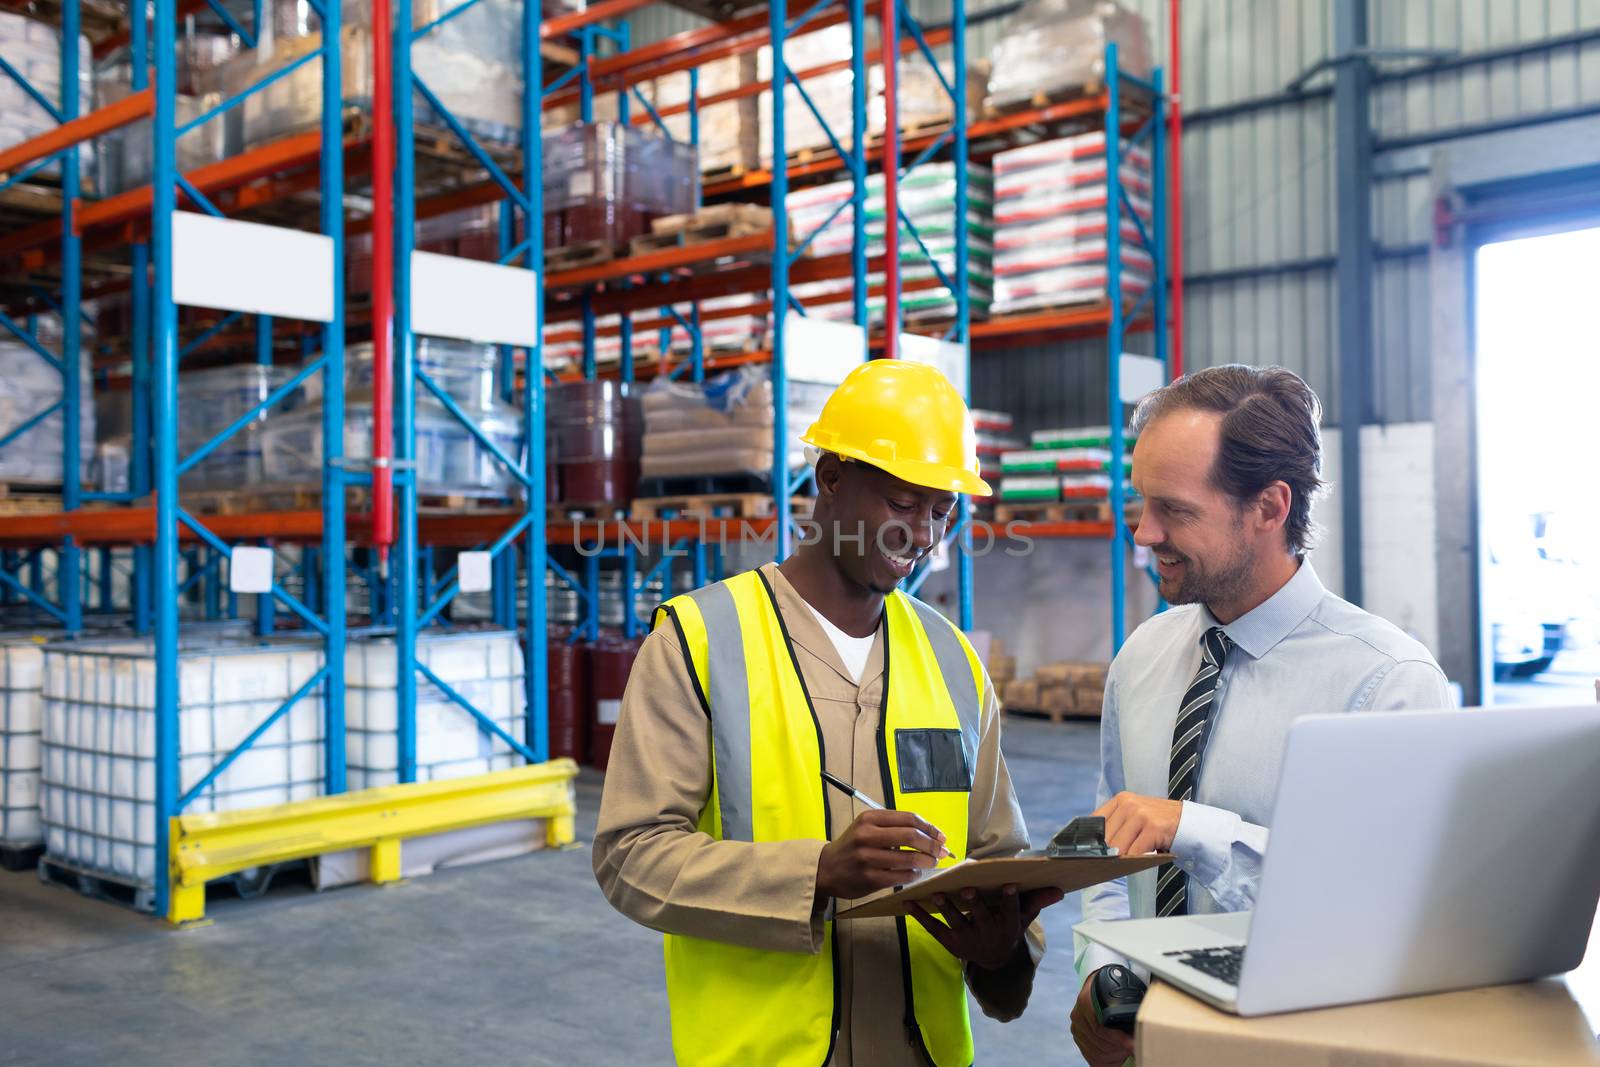 Front view of happy diverse staffs discussing over clipboard in warehouse. This is a freight transportation and distribution warehouse. Industrial and industrial workers concept